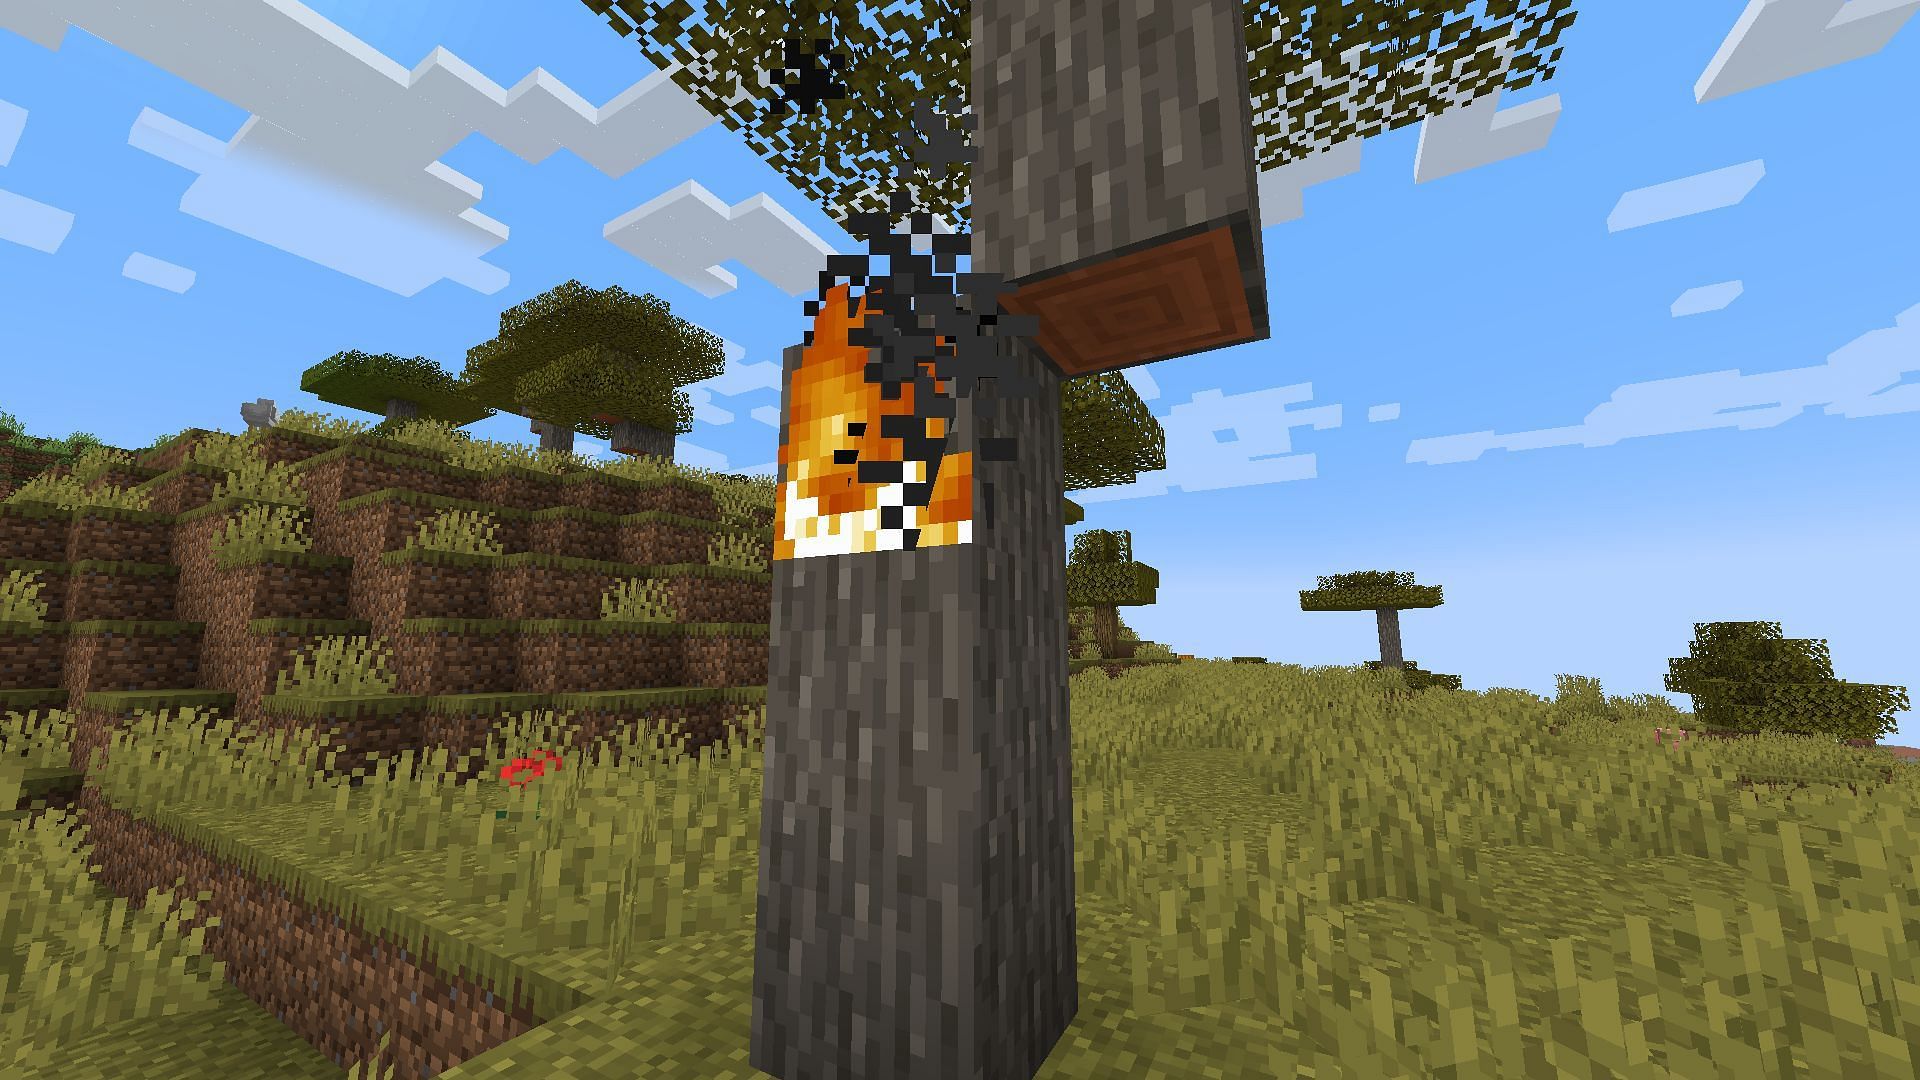 Fire tick needs to be disabled in order to stop fire from spreading in Minecraft (Image via Mojang)